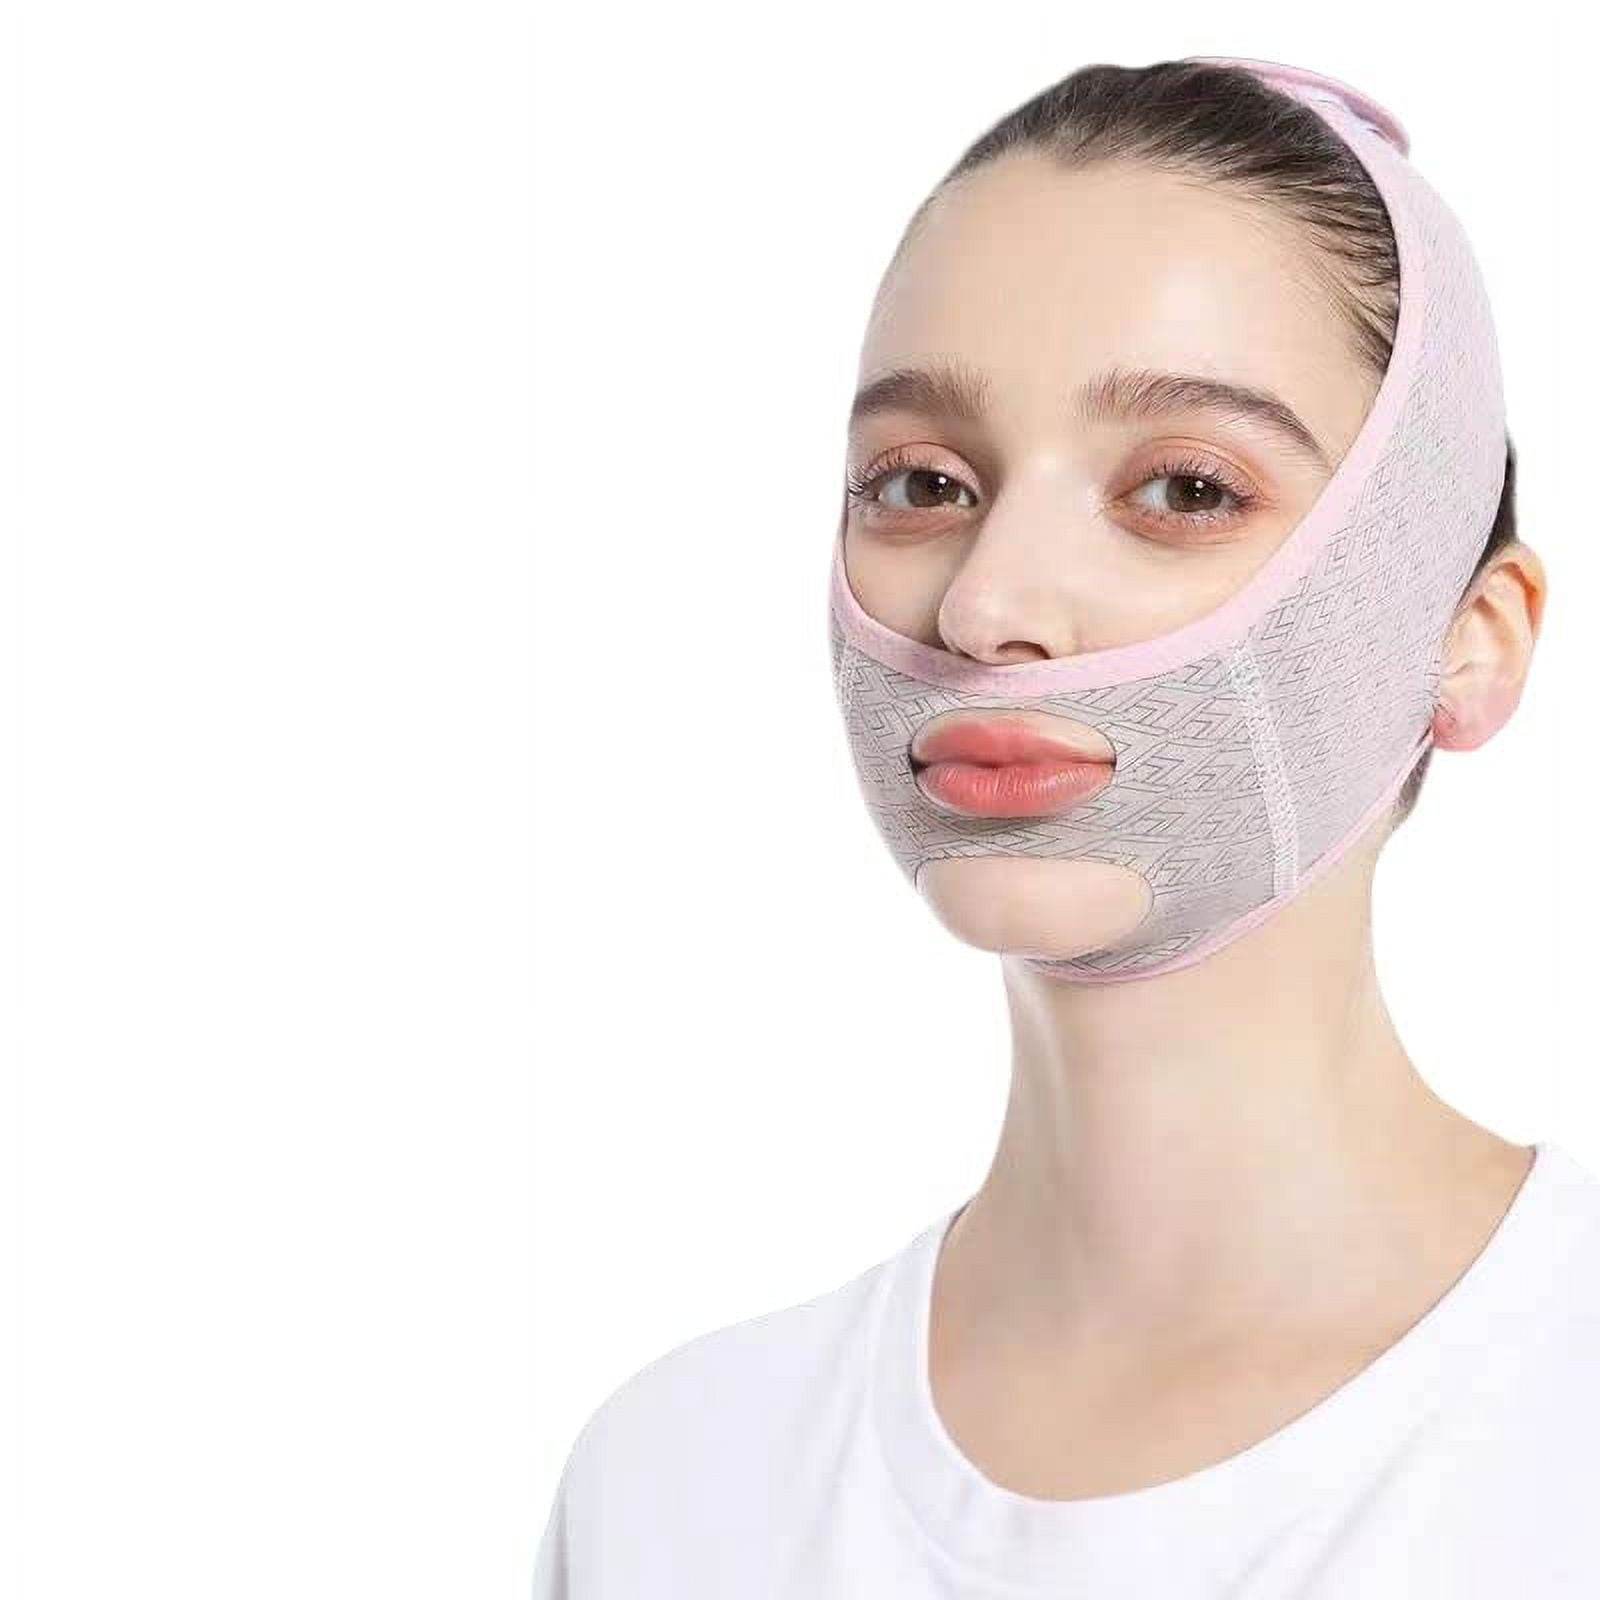 Beauty Face Sculpting Sleep Maskv Line Lifting Mask Facial Slimming Strap,double  Chin Reducer, Chin Up Mask Face Lifting Belt